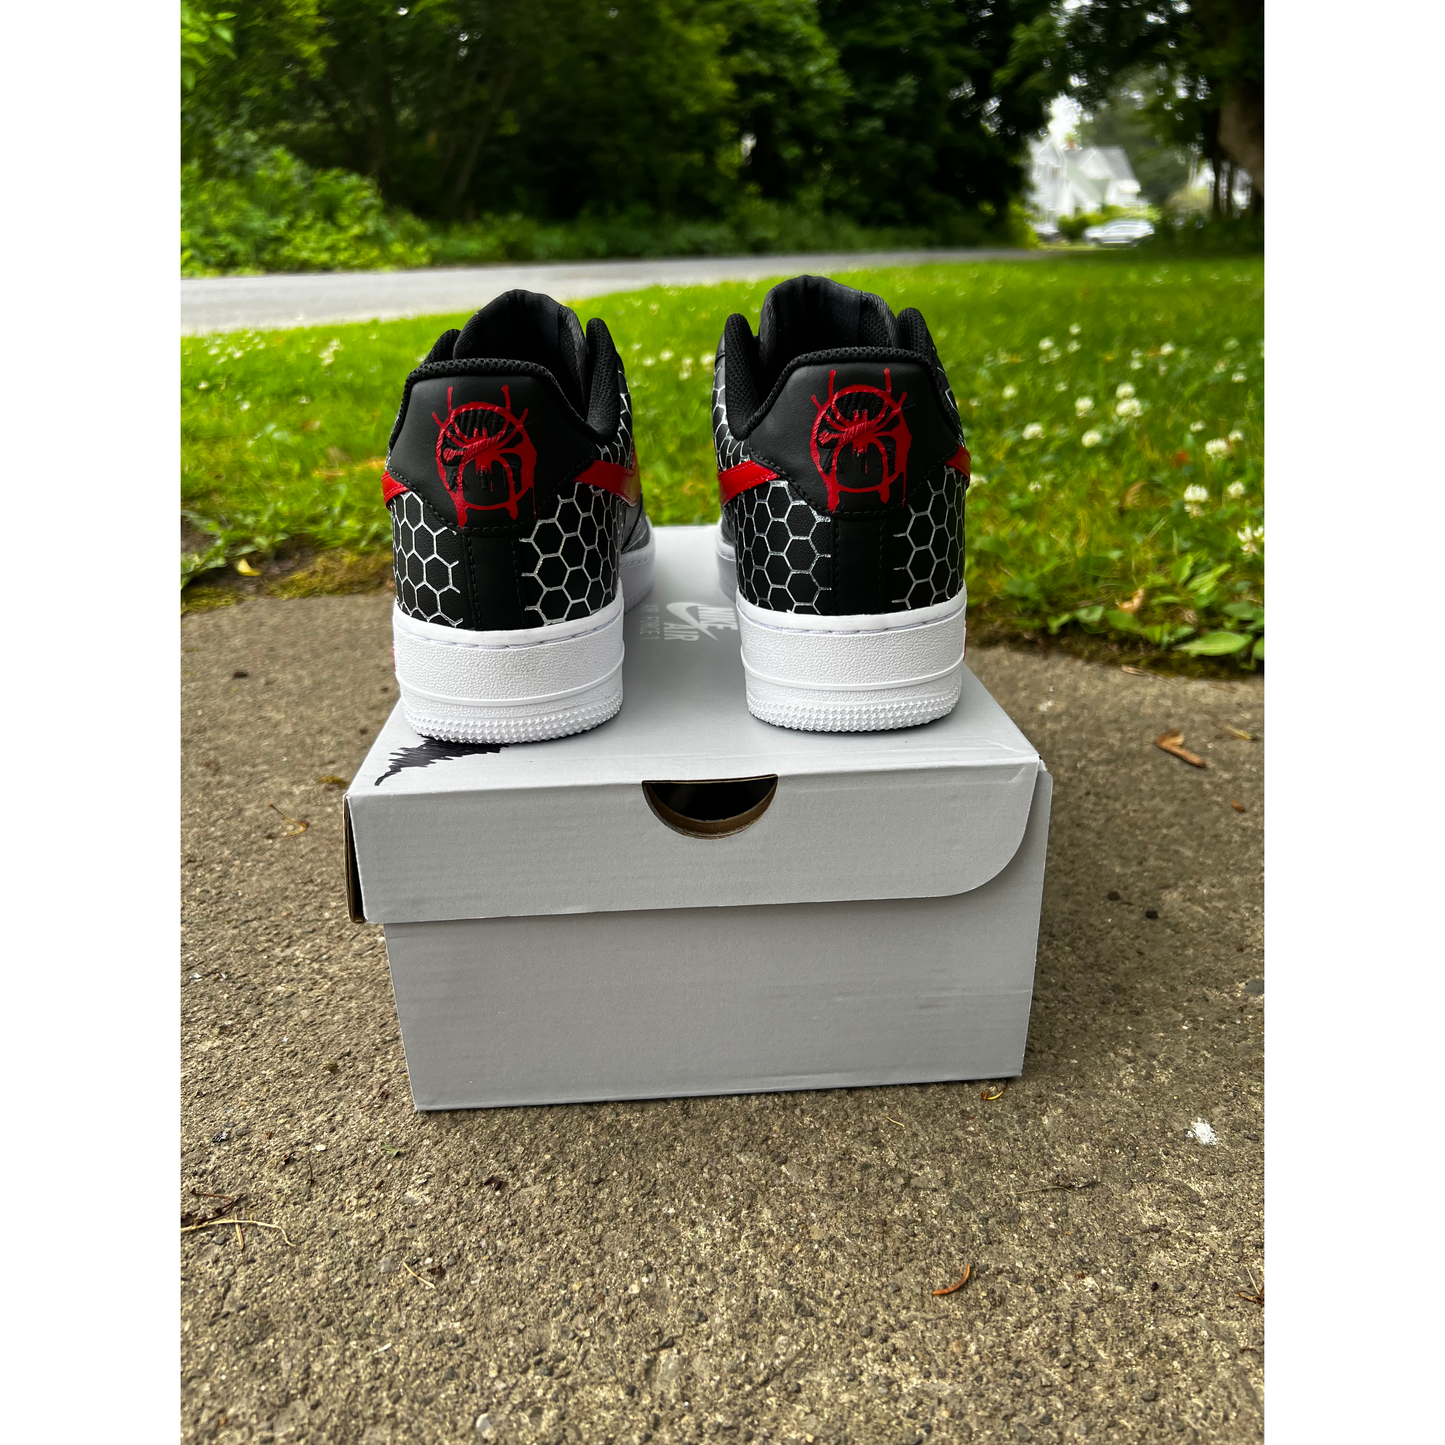 Nike Air Force 1 Custom Red LV Drip Size 12.5 New With Box